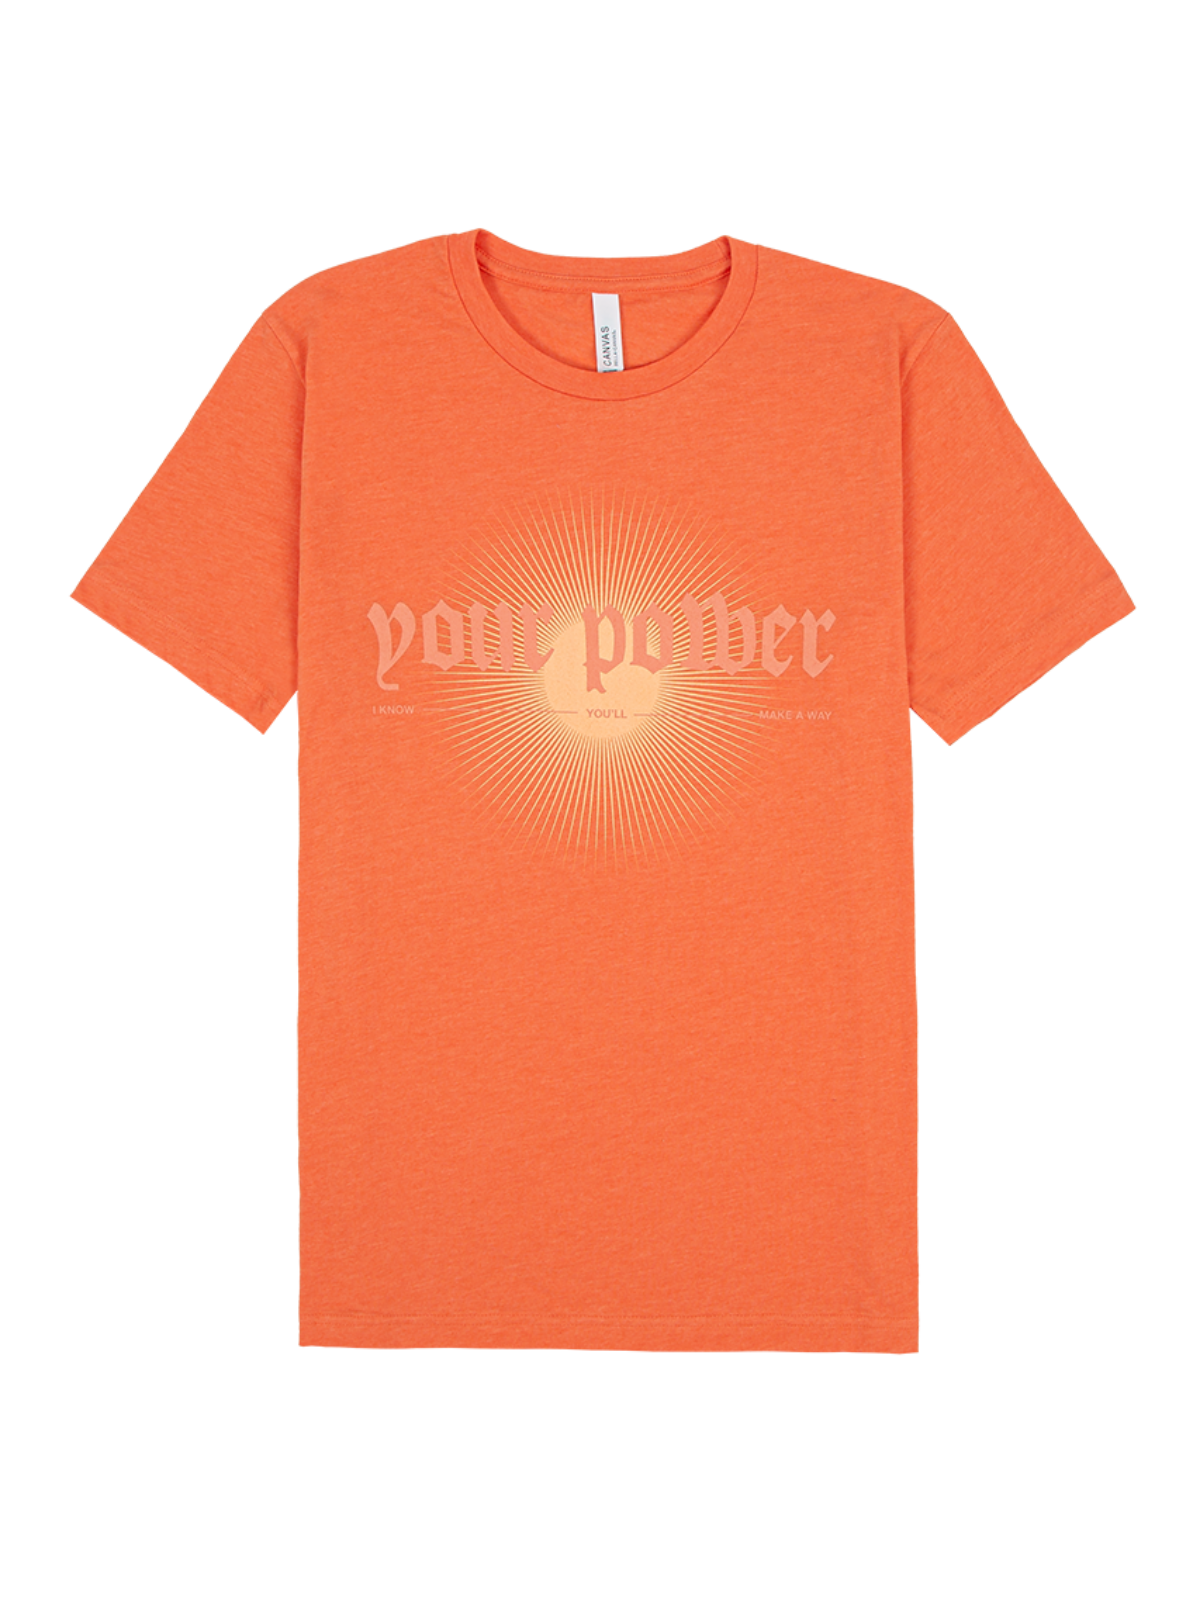 Your Power Tee